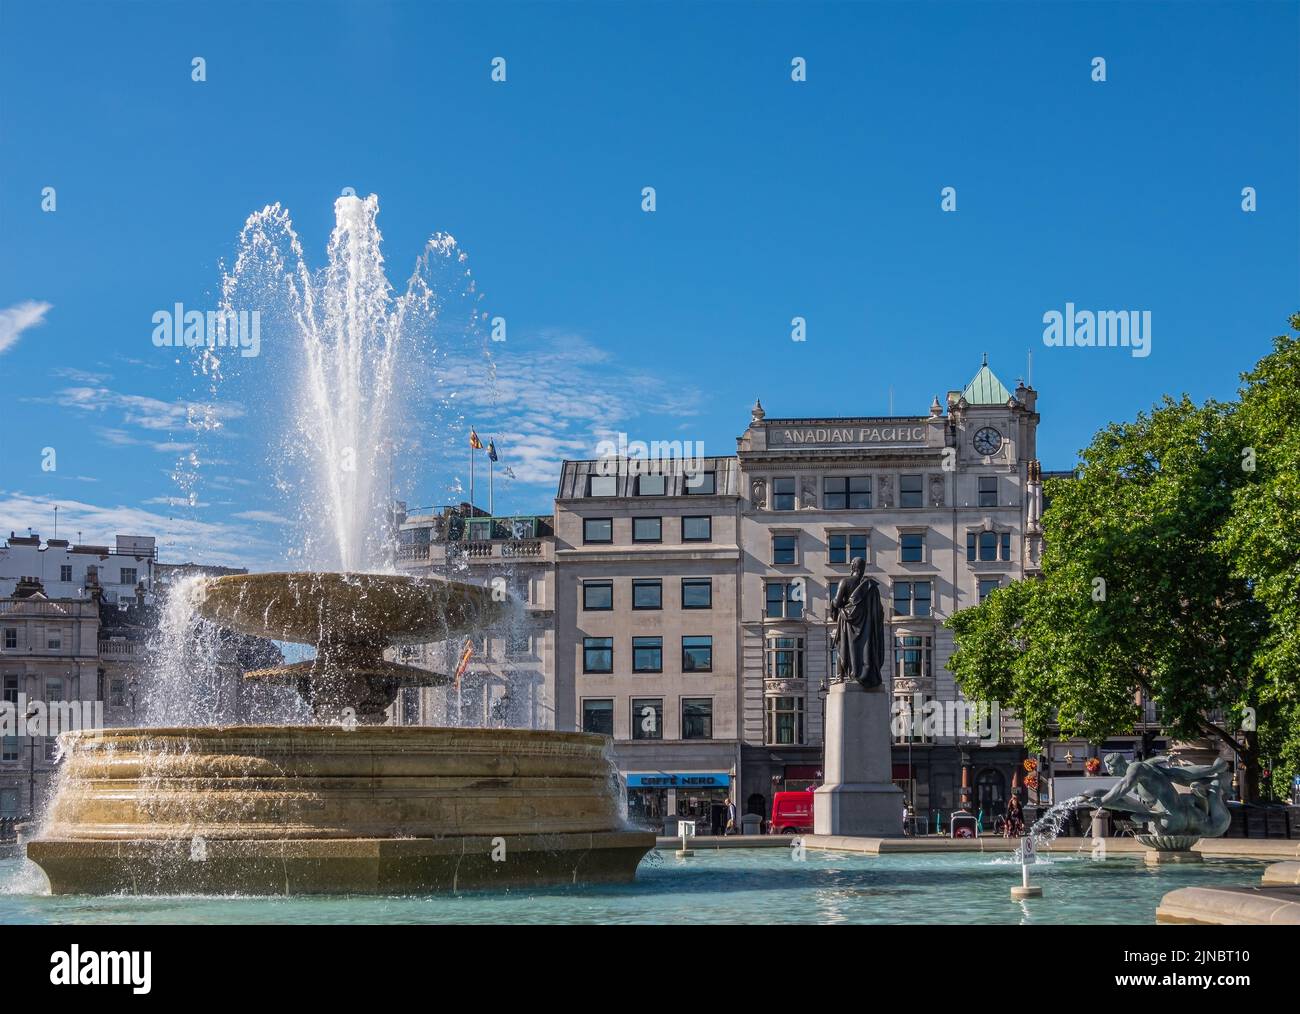 London, UK- July 4, 2022: Trafalgar Square. West side fountain with mermaid statue and Cockspur Street and Canadian Pacific building in back under blu Stock Photo